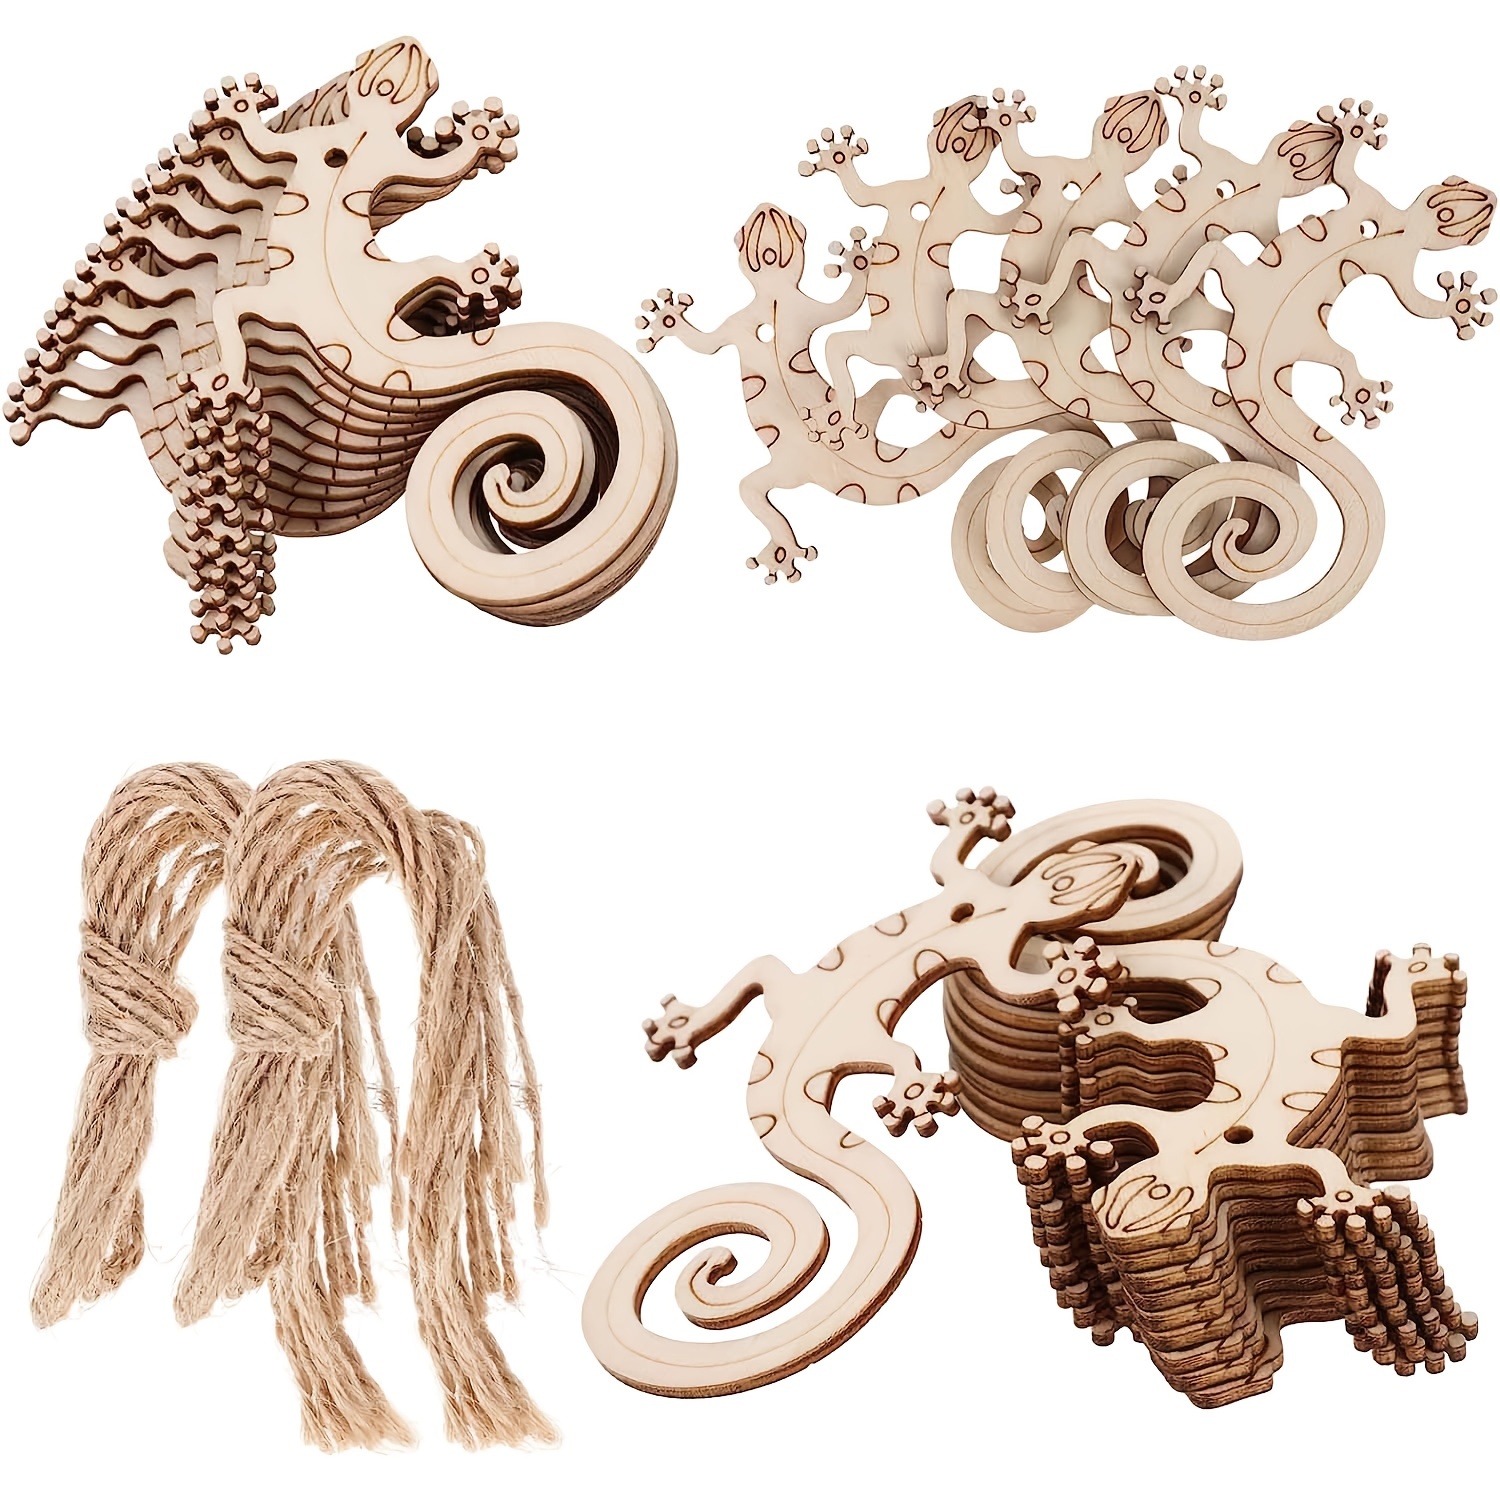 Wooden Craft Shapes